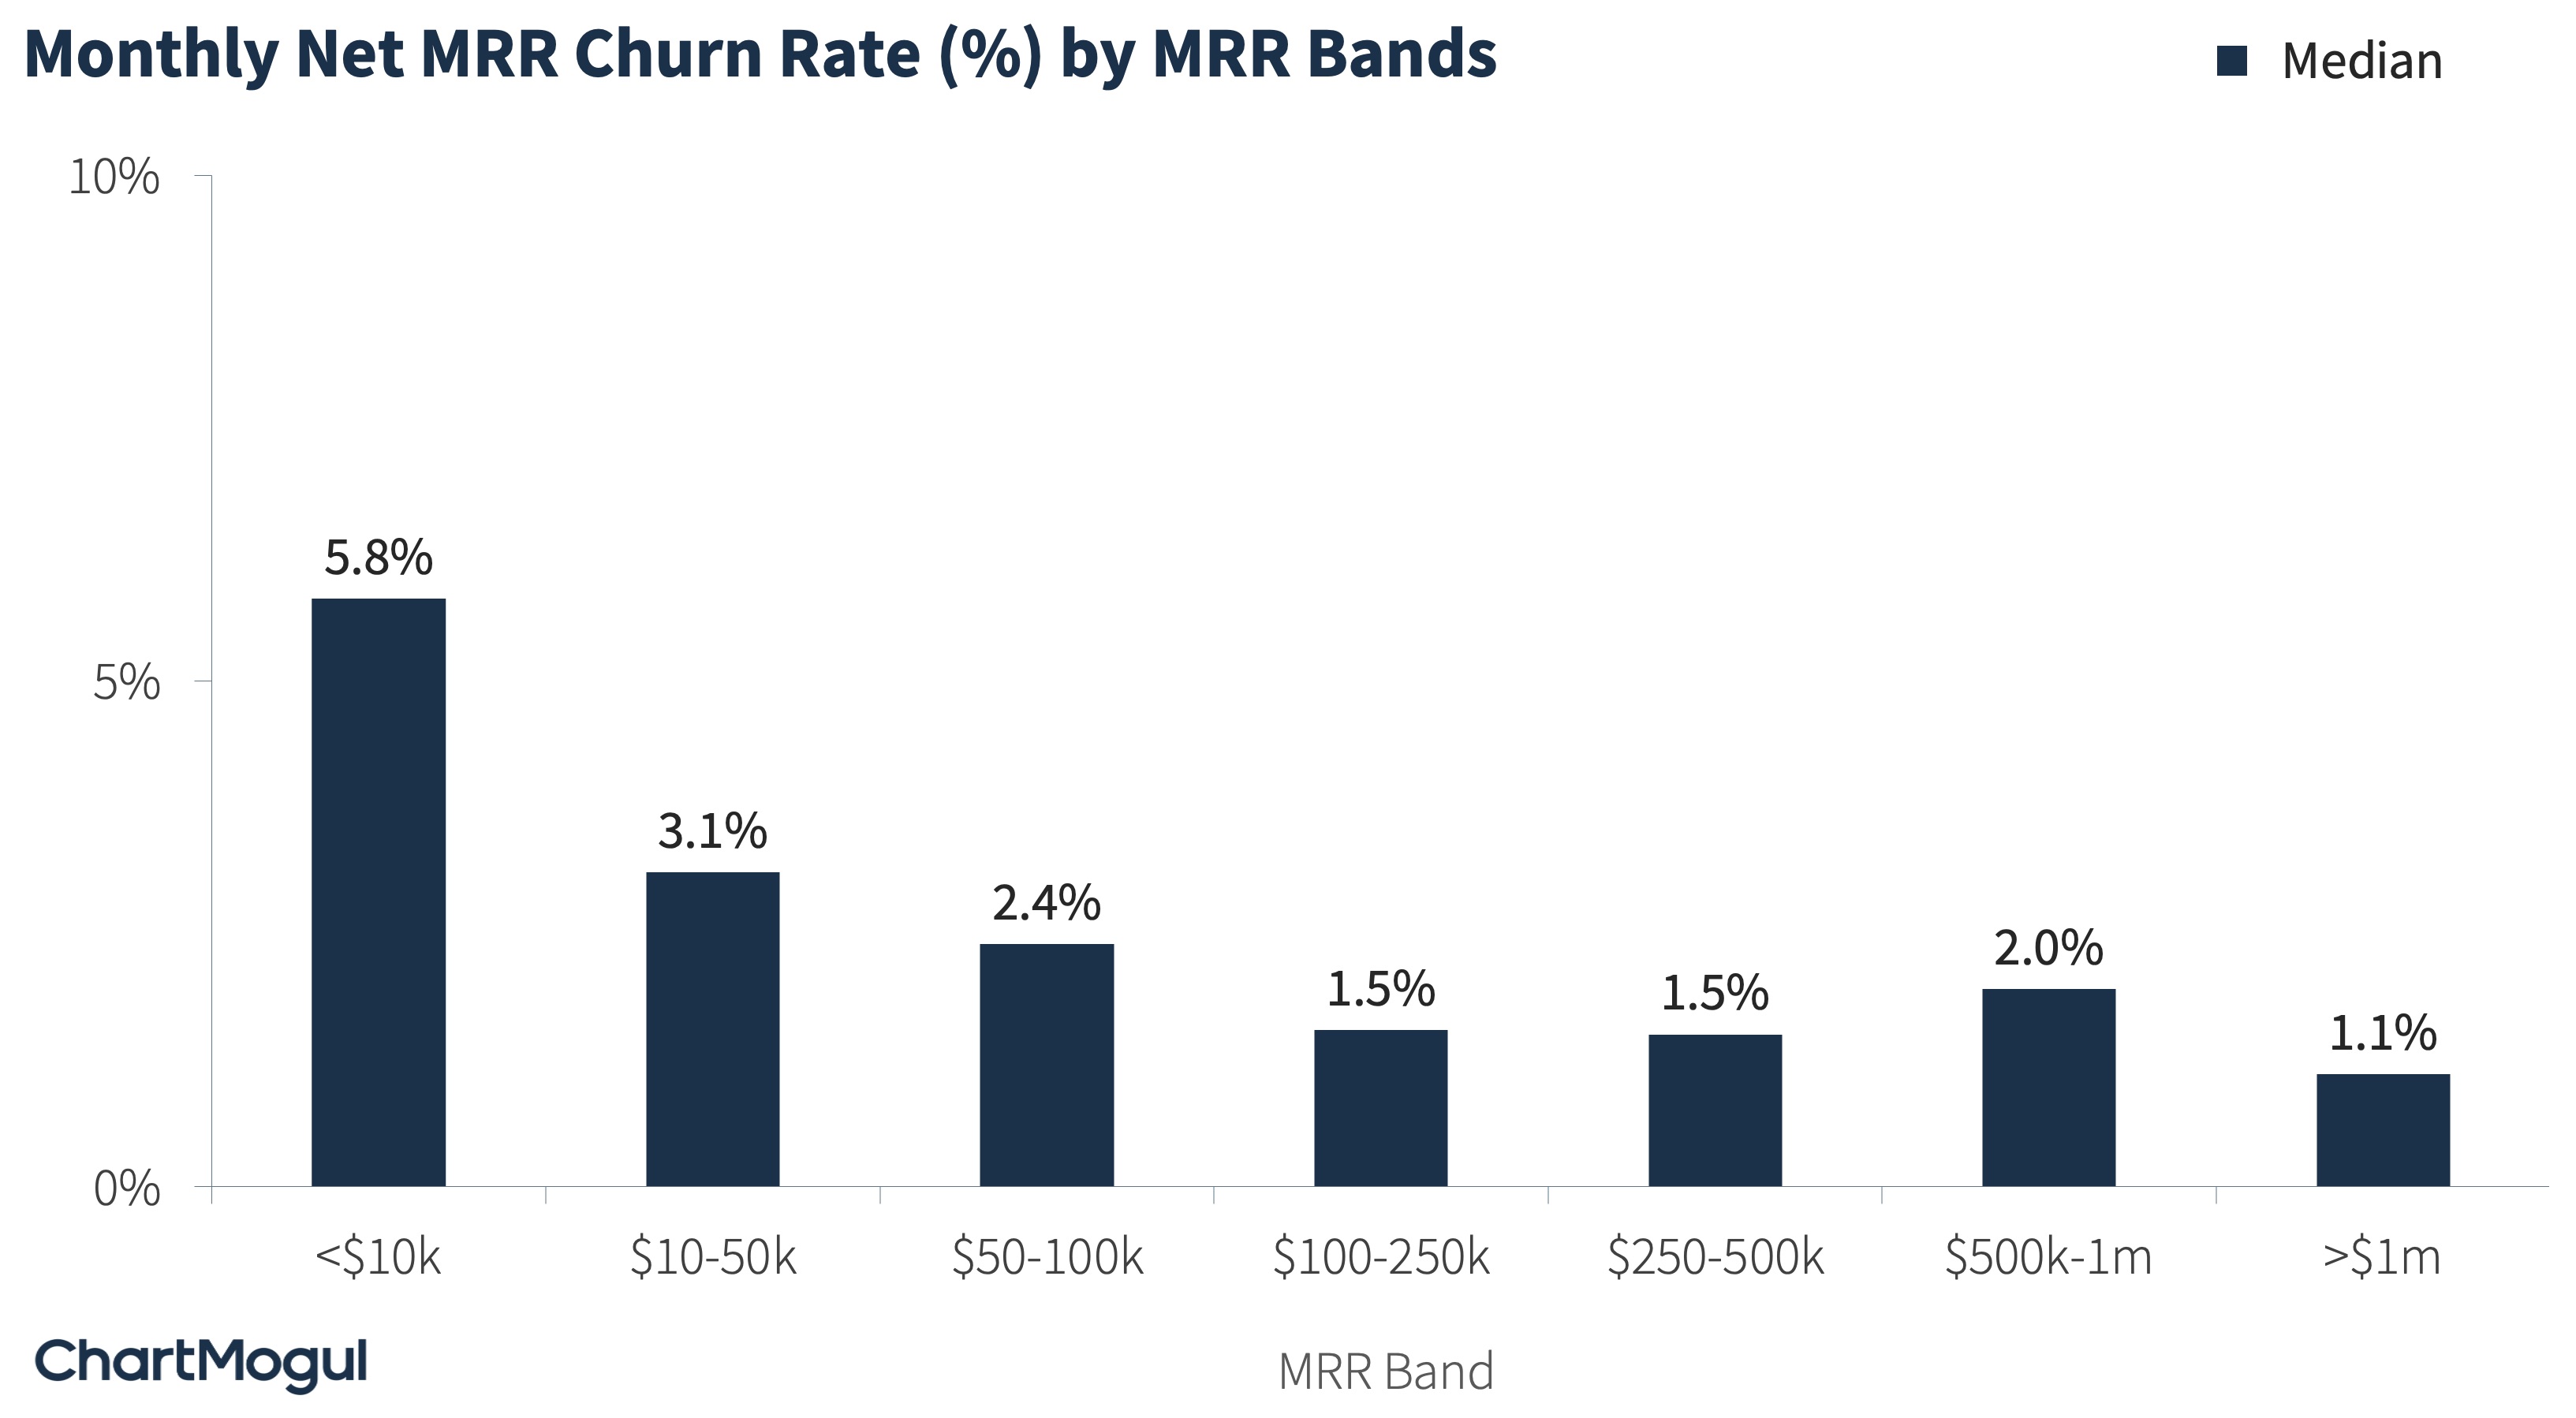 Monthly net MRR churn rate by MRR bands